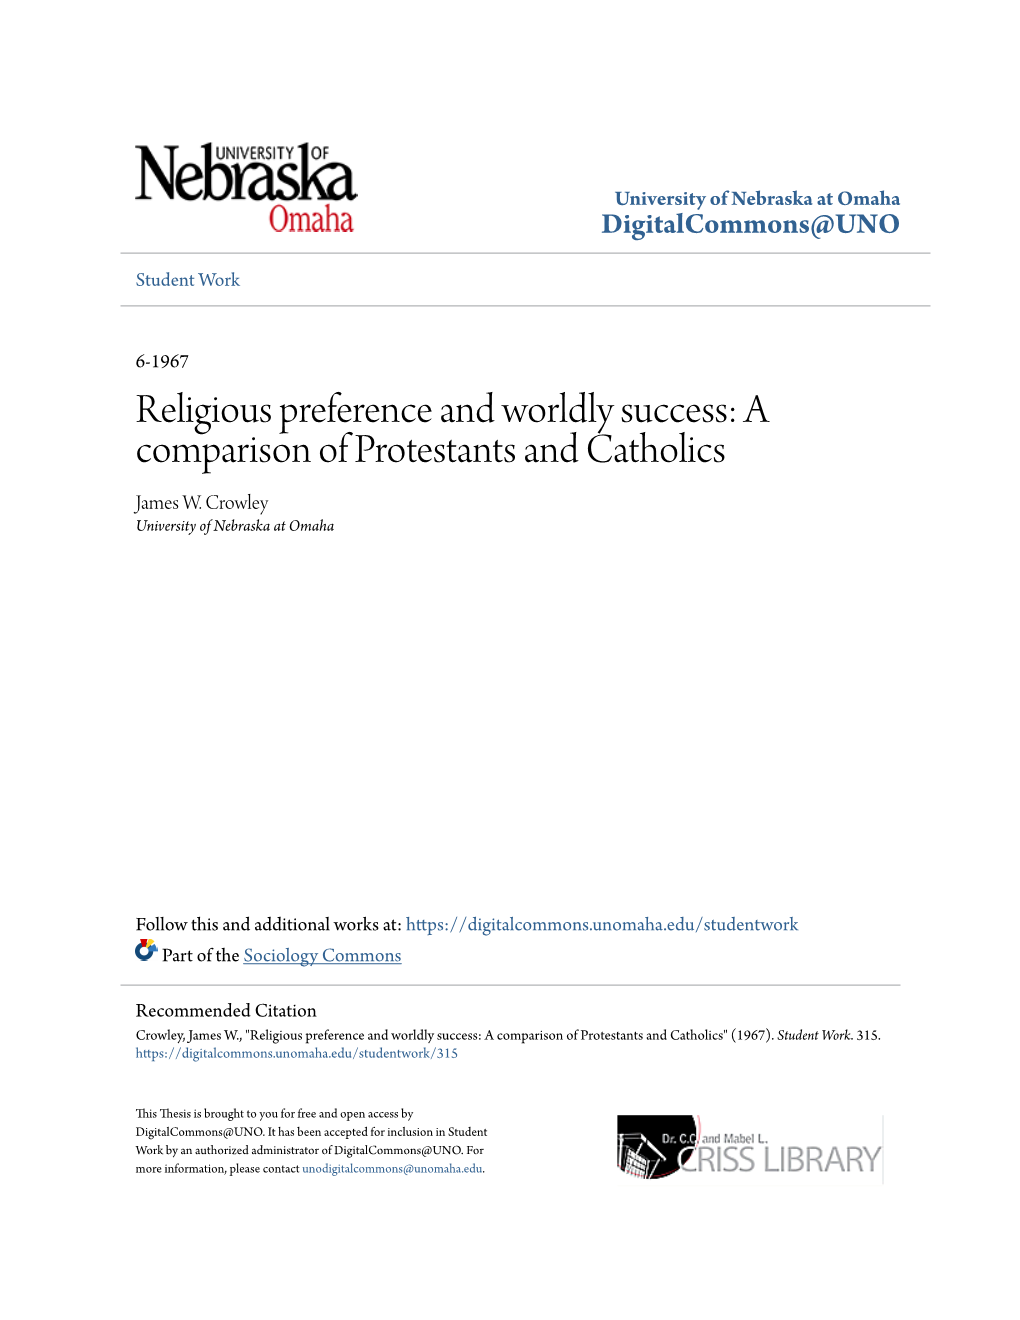 Religious Preference and Worldly Success: a Comparison of Protestants and Catholics James W